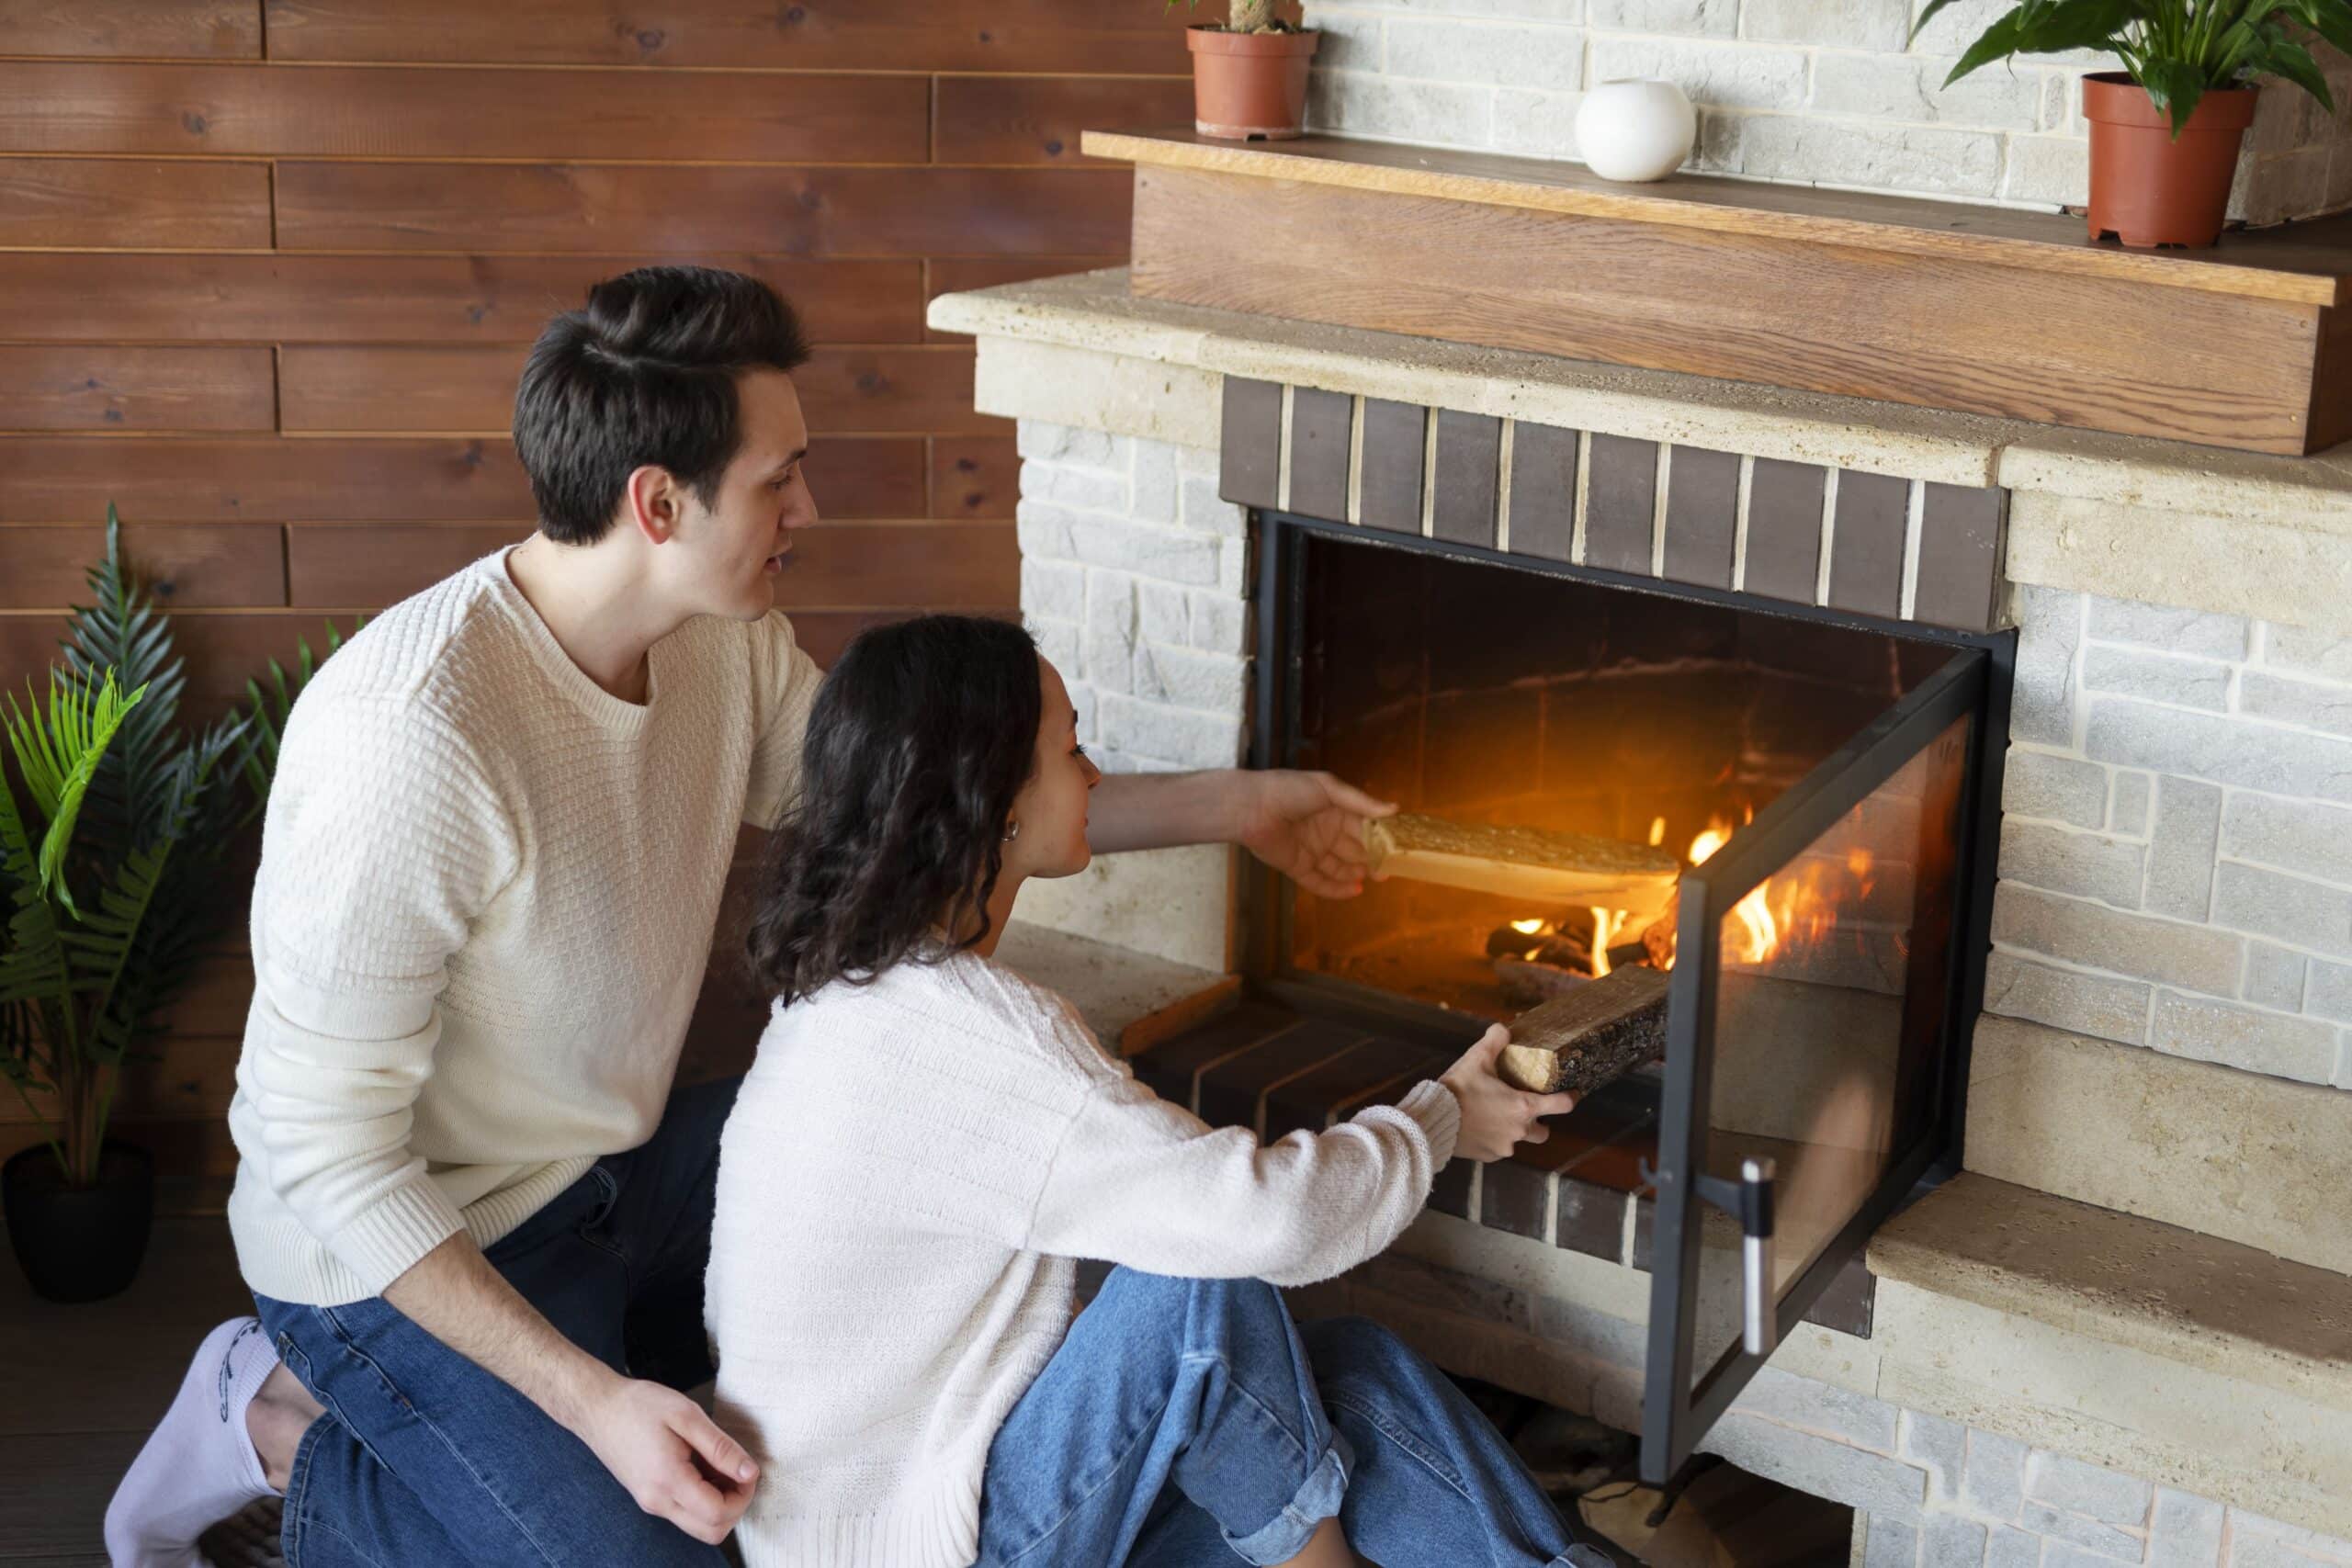 two people lighting a fireplace using a fireplace lighter and wood